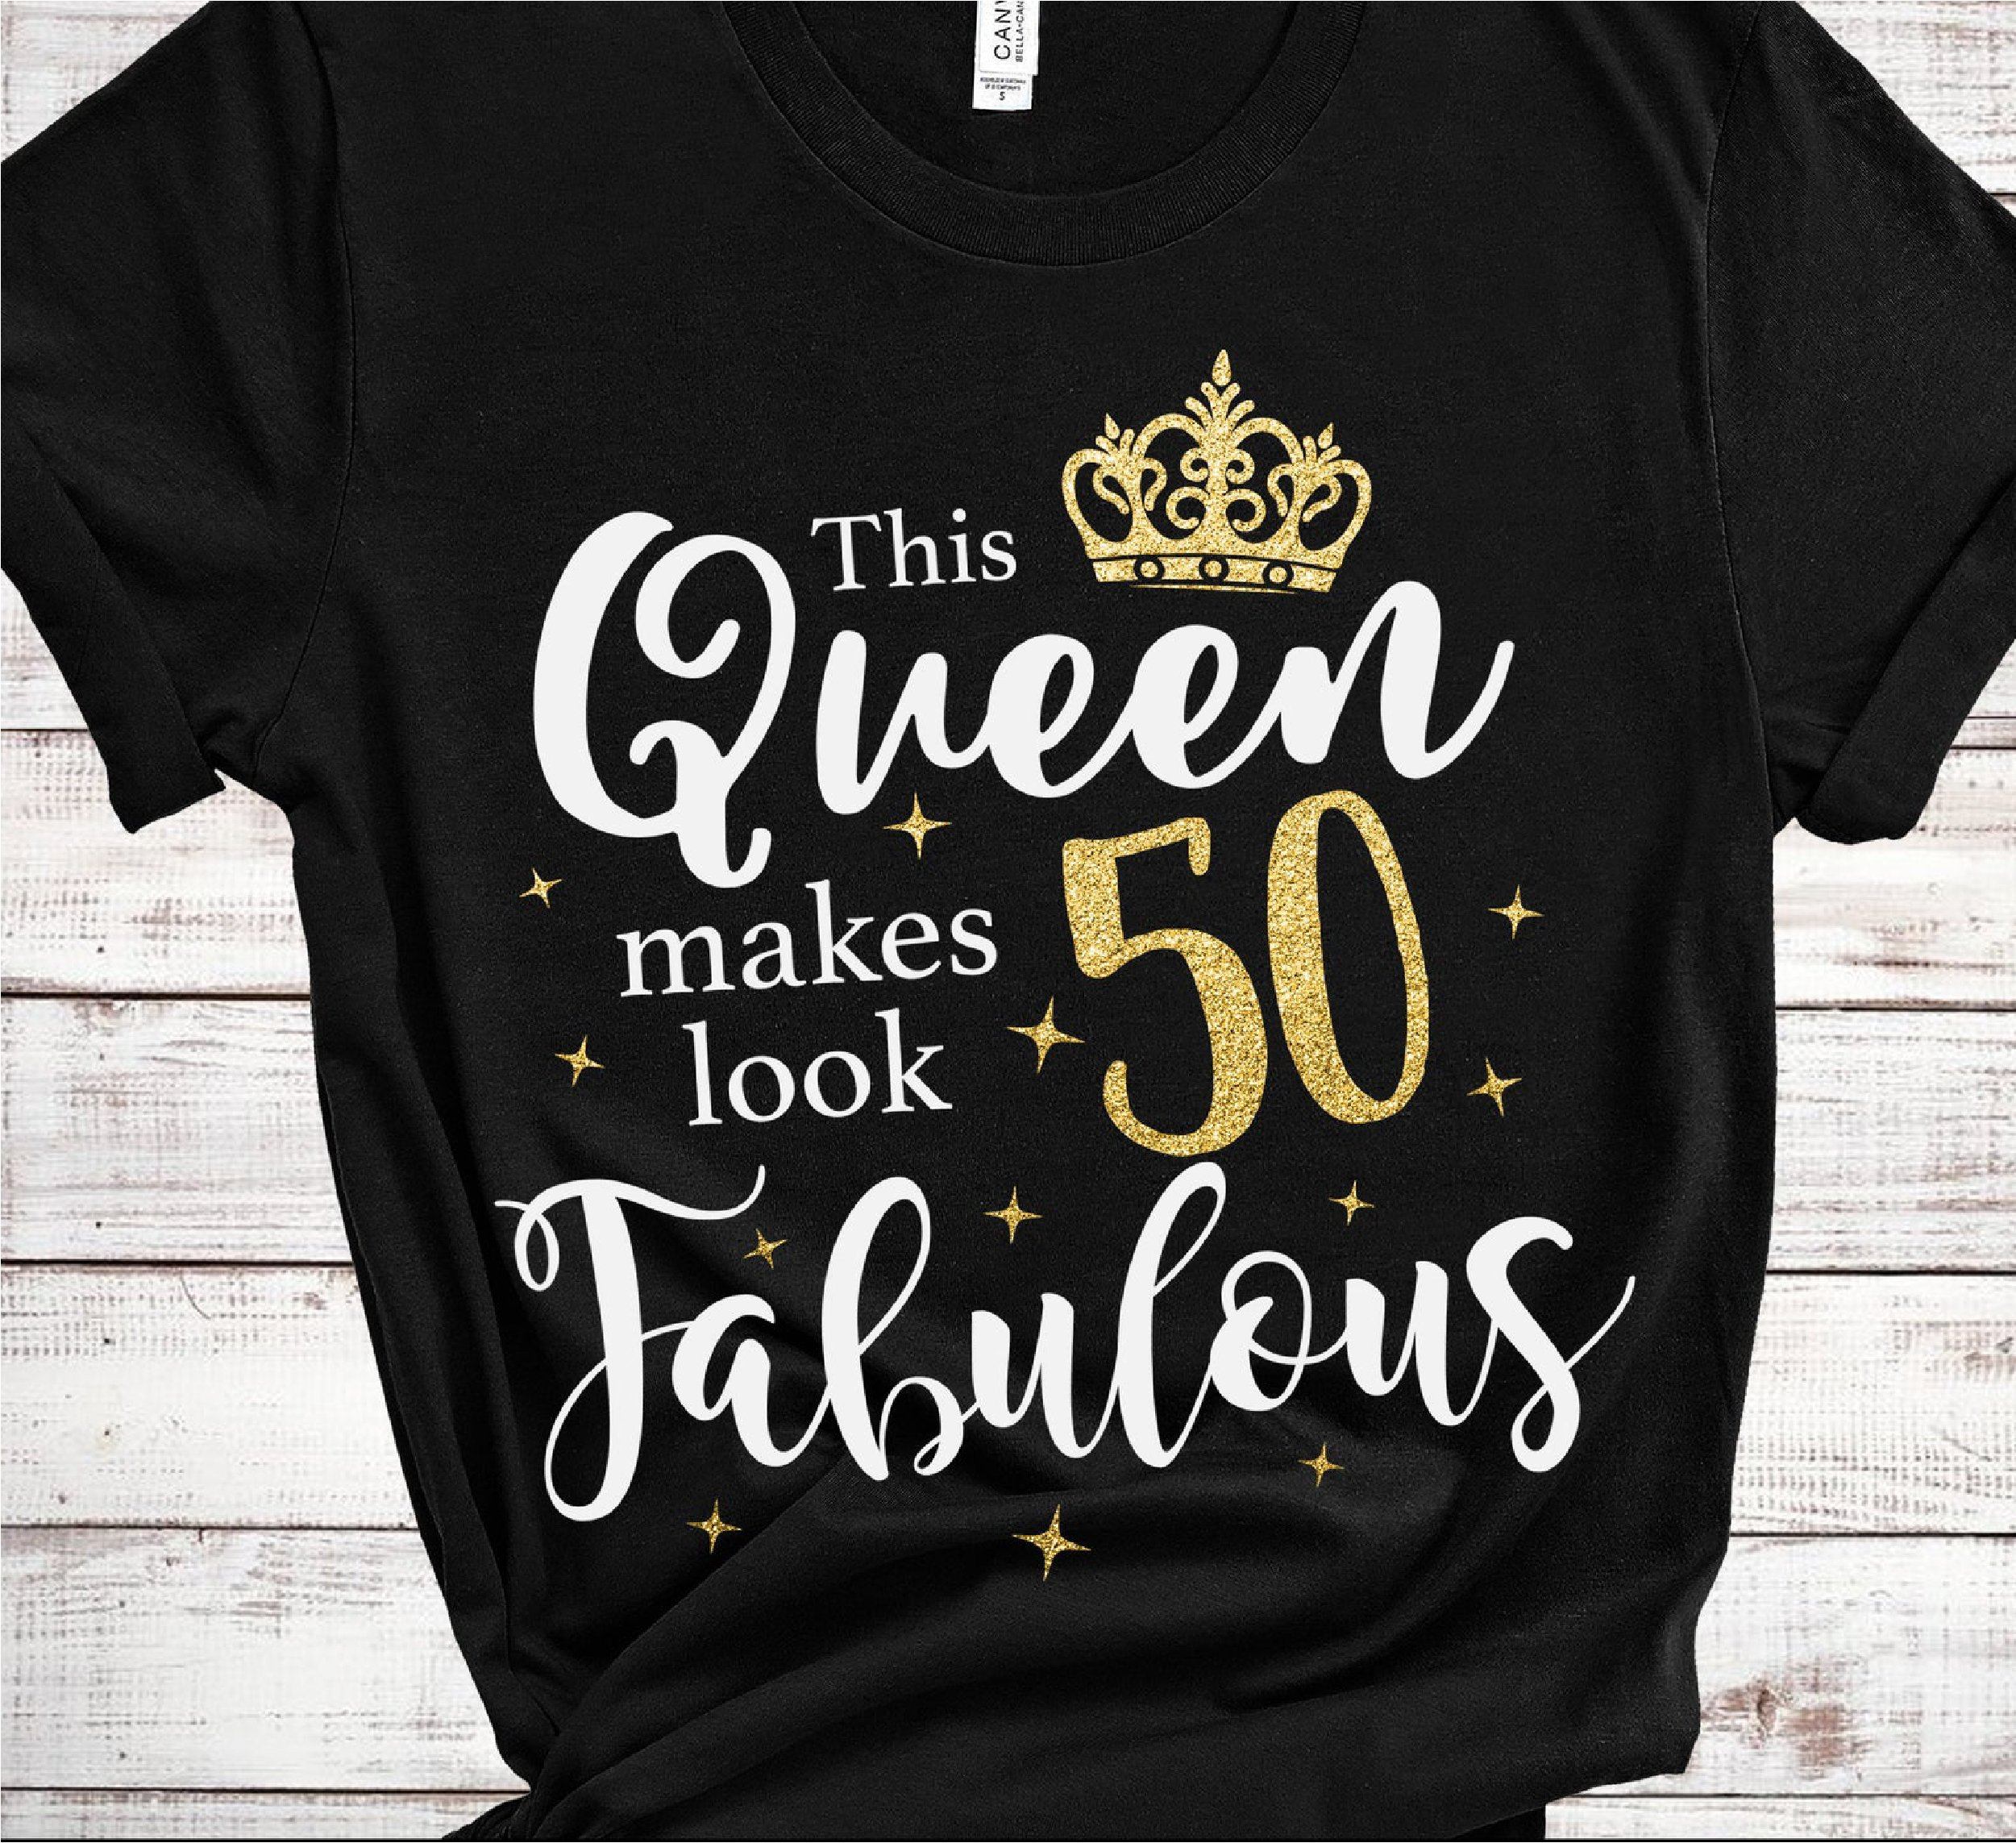 Personalized 50th Birthday Queen Sparkly Fabulous T-Shirts Buy Now